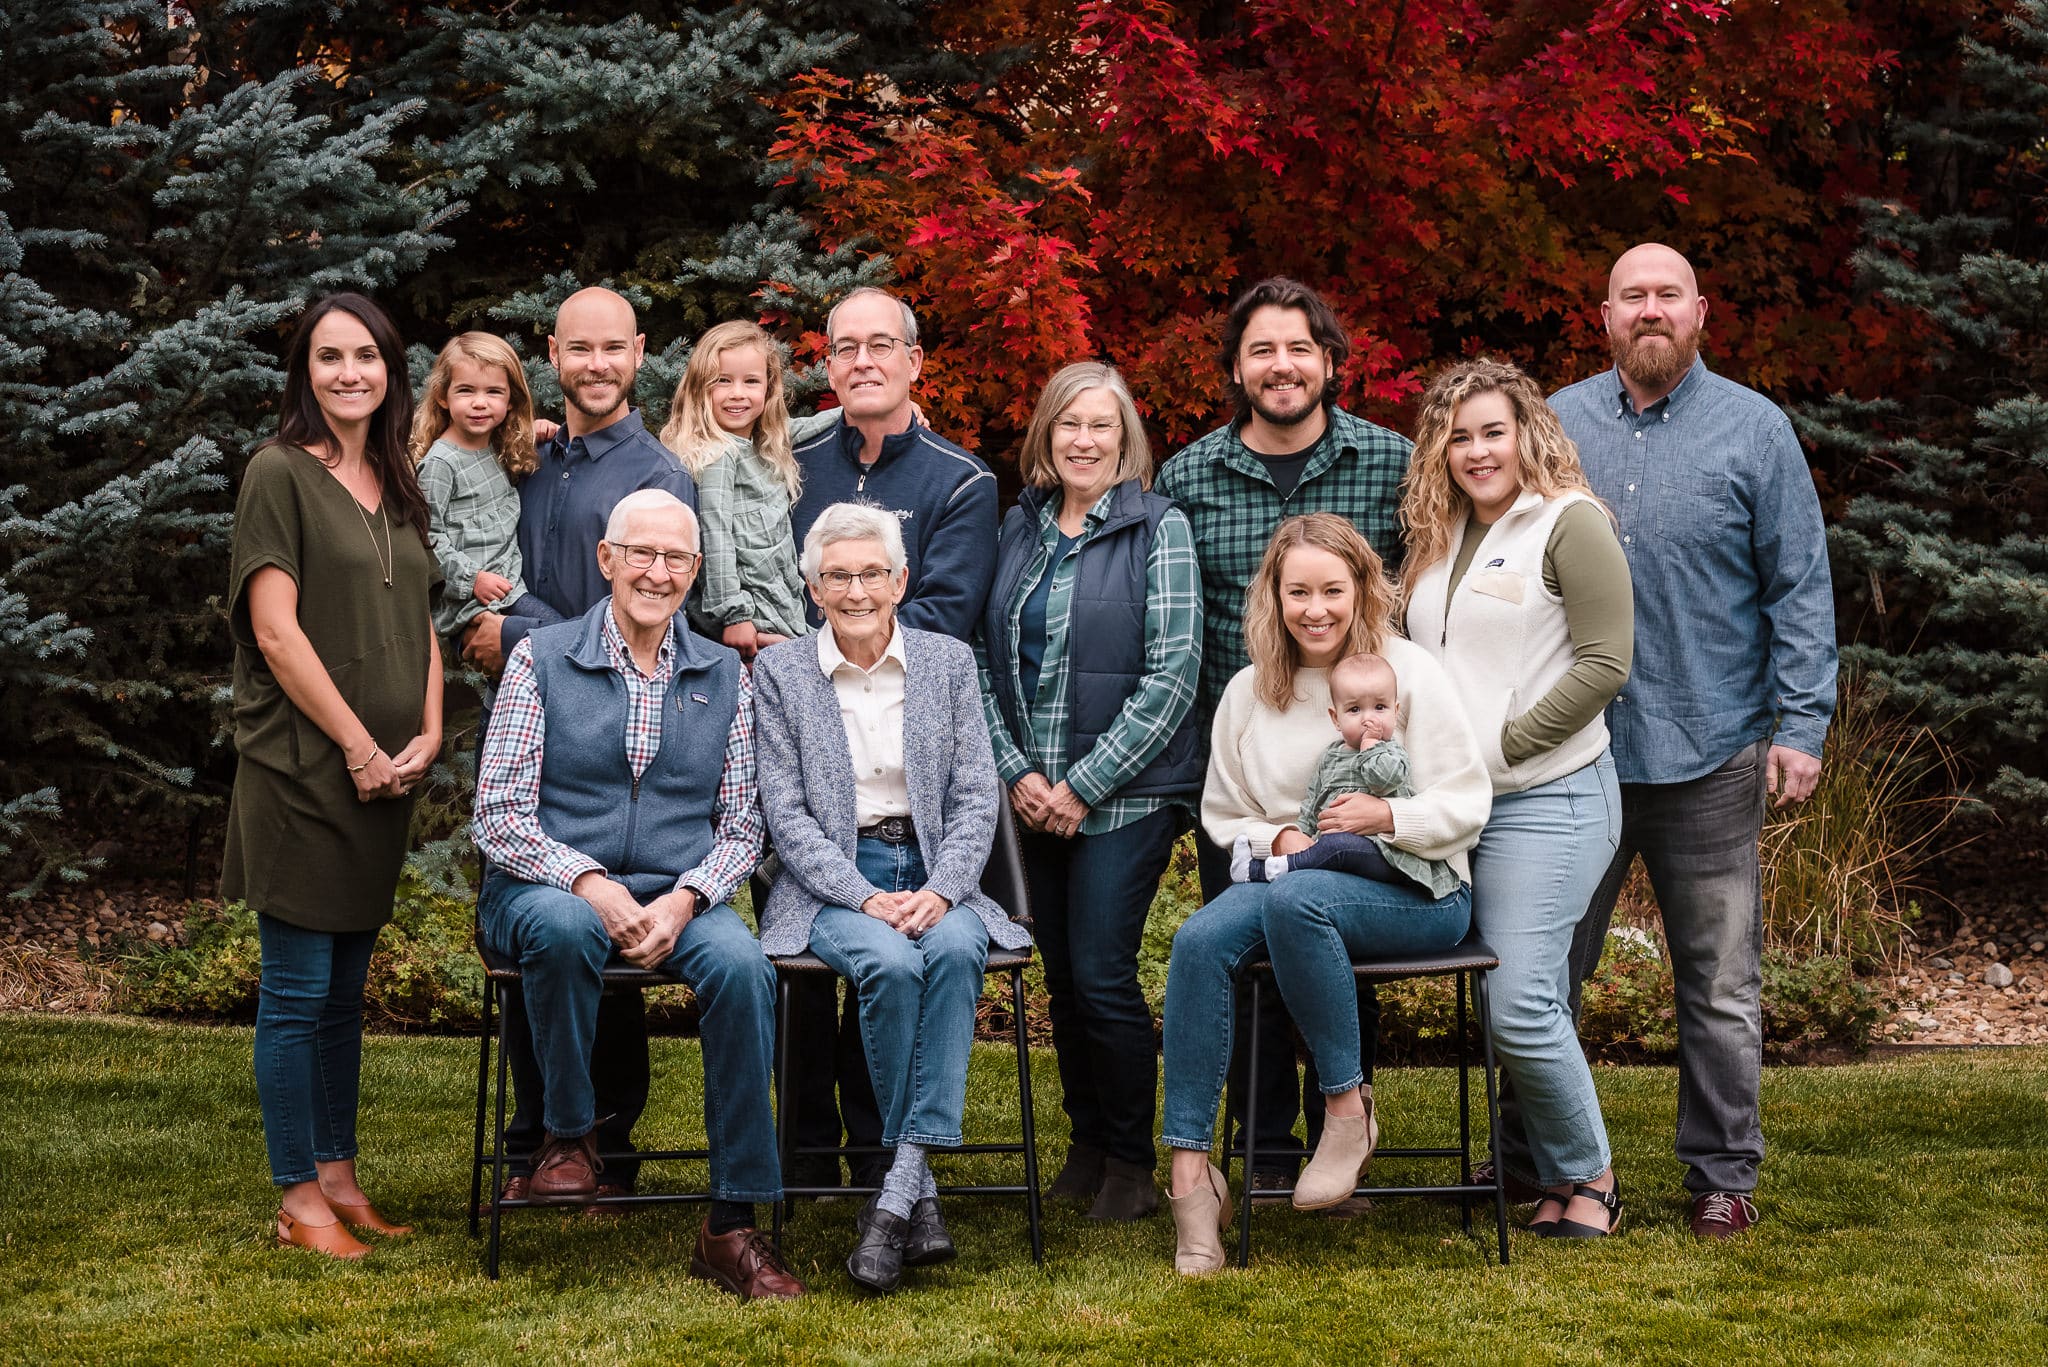 A large group multi-generational photo taken with plenty of room to spare in a relative's backyard.